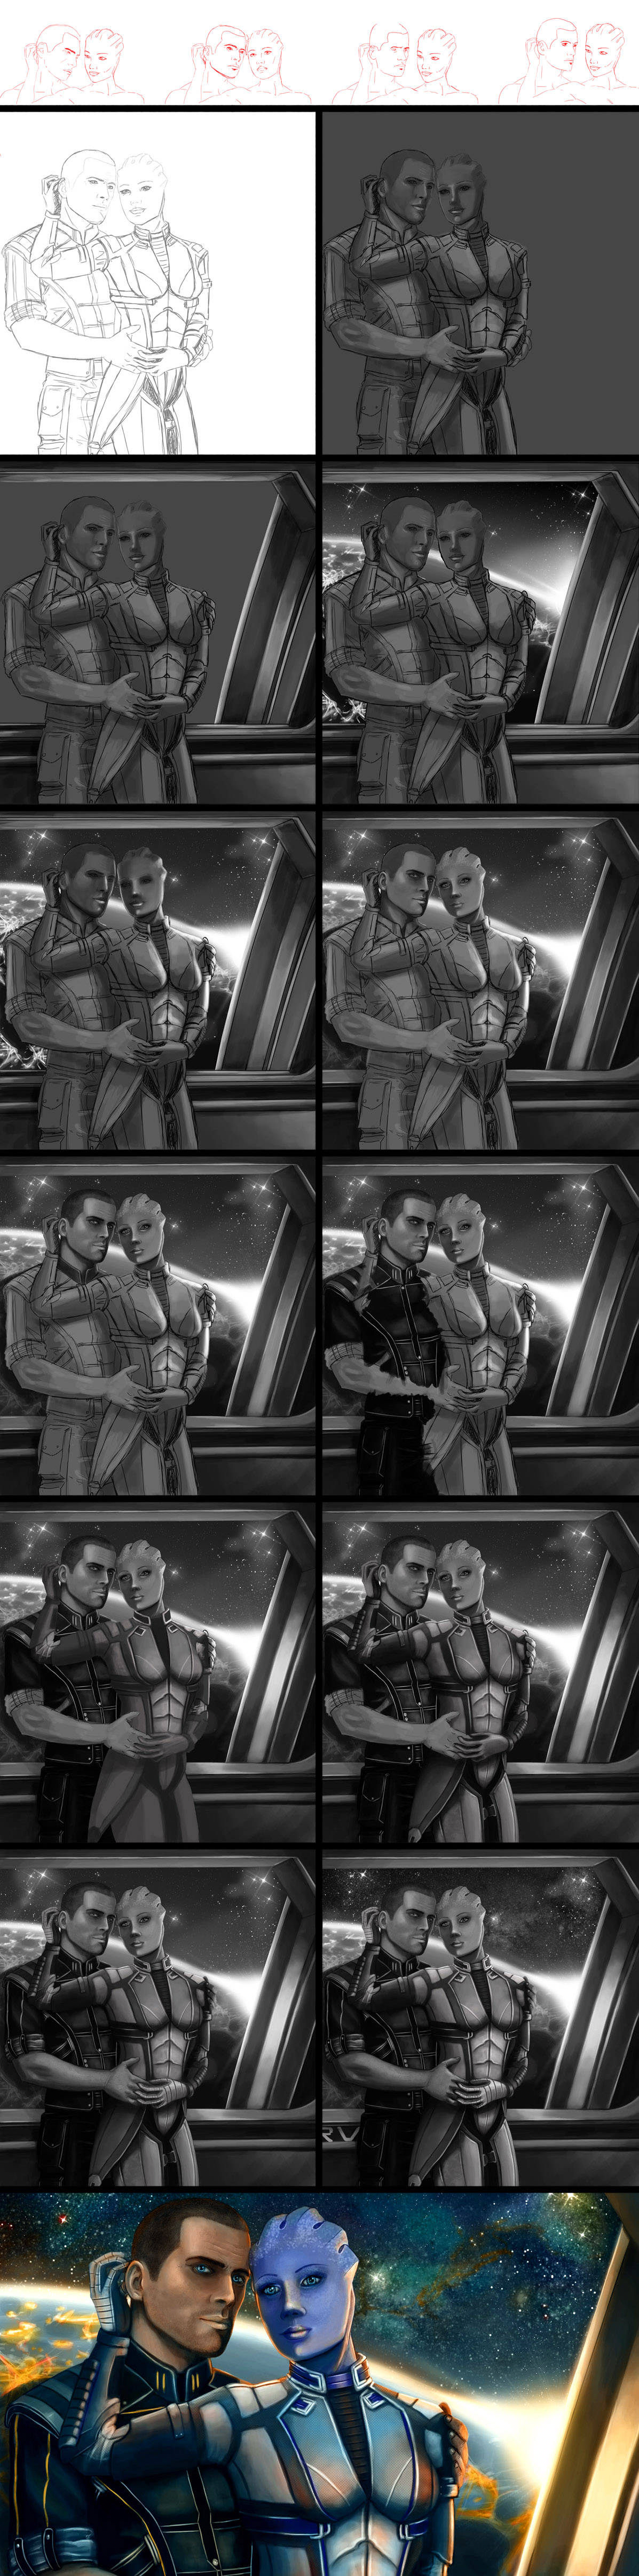 Making of Liara and Shepard - Always here for you.